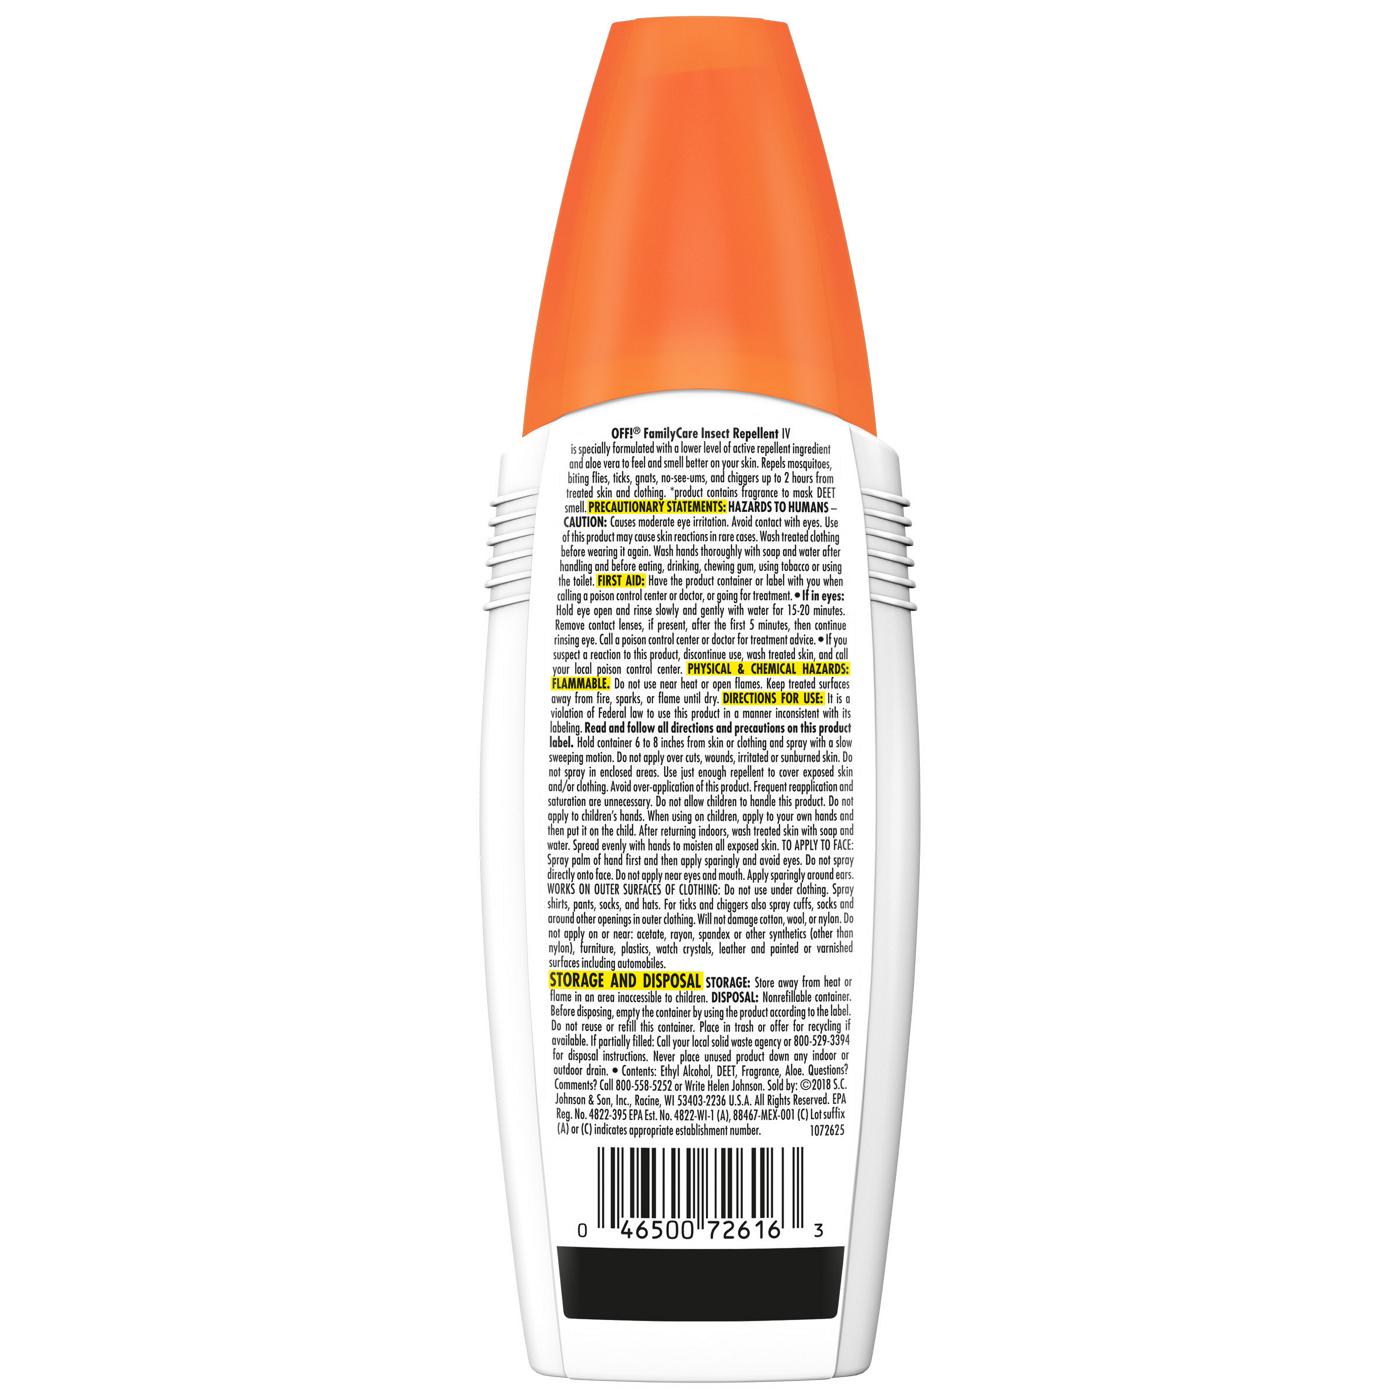 Off! FamilyCare Unscented Insect Repellent IV Spray; image 2 of 2